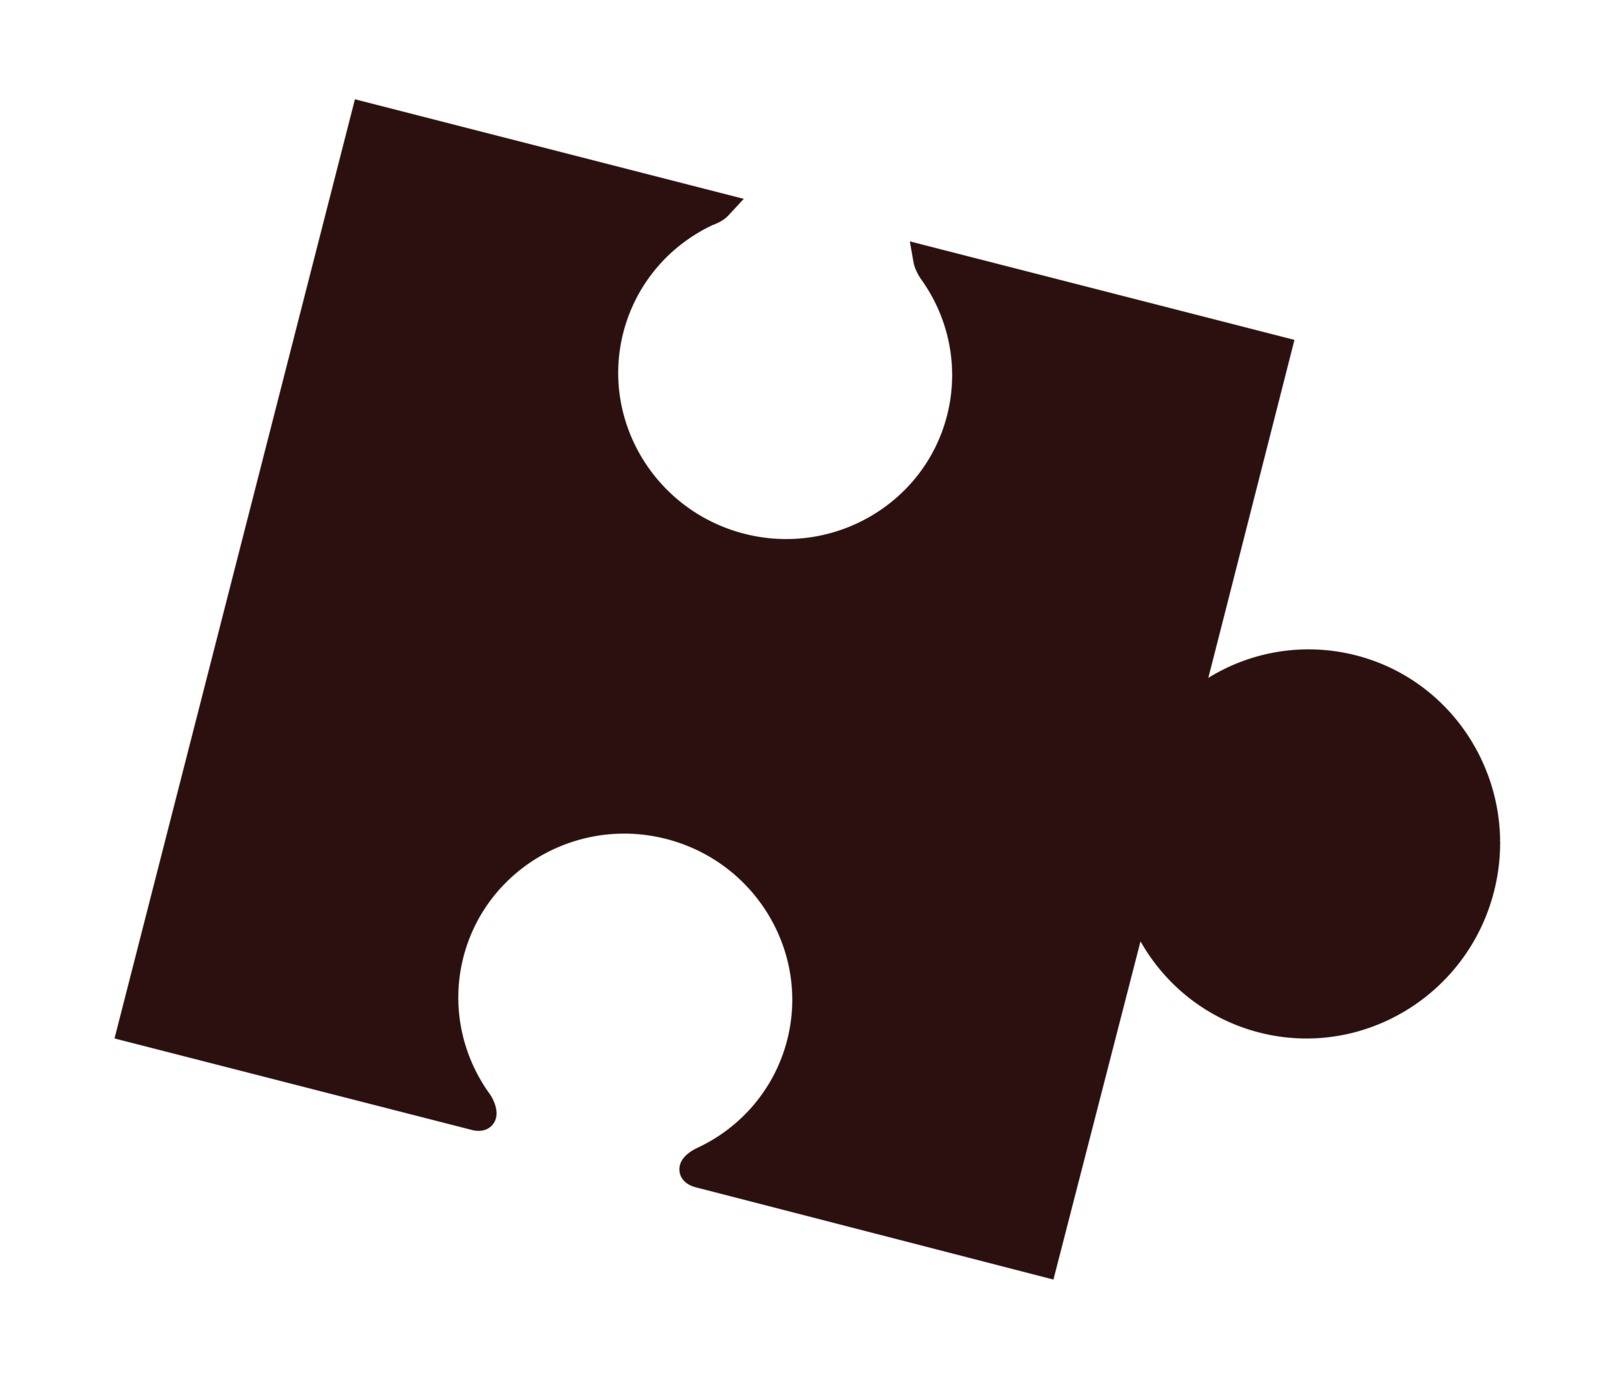 Isolated black jigsaw piece over a white background